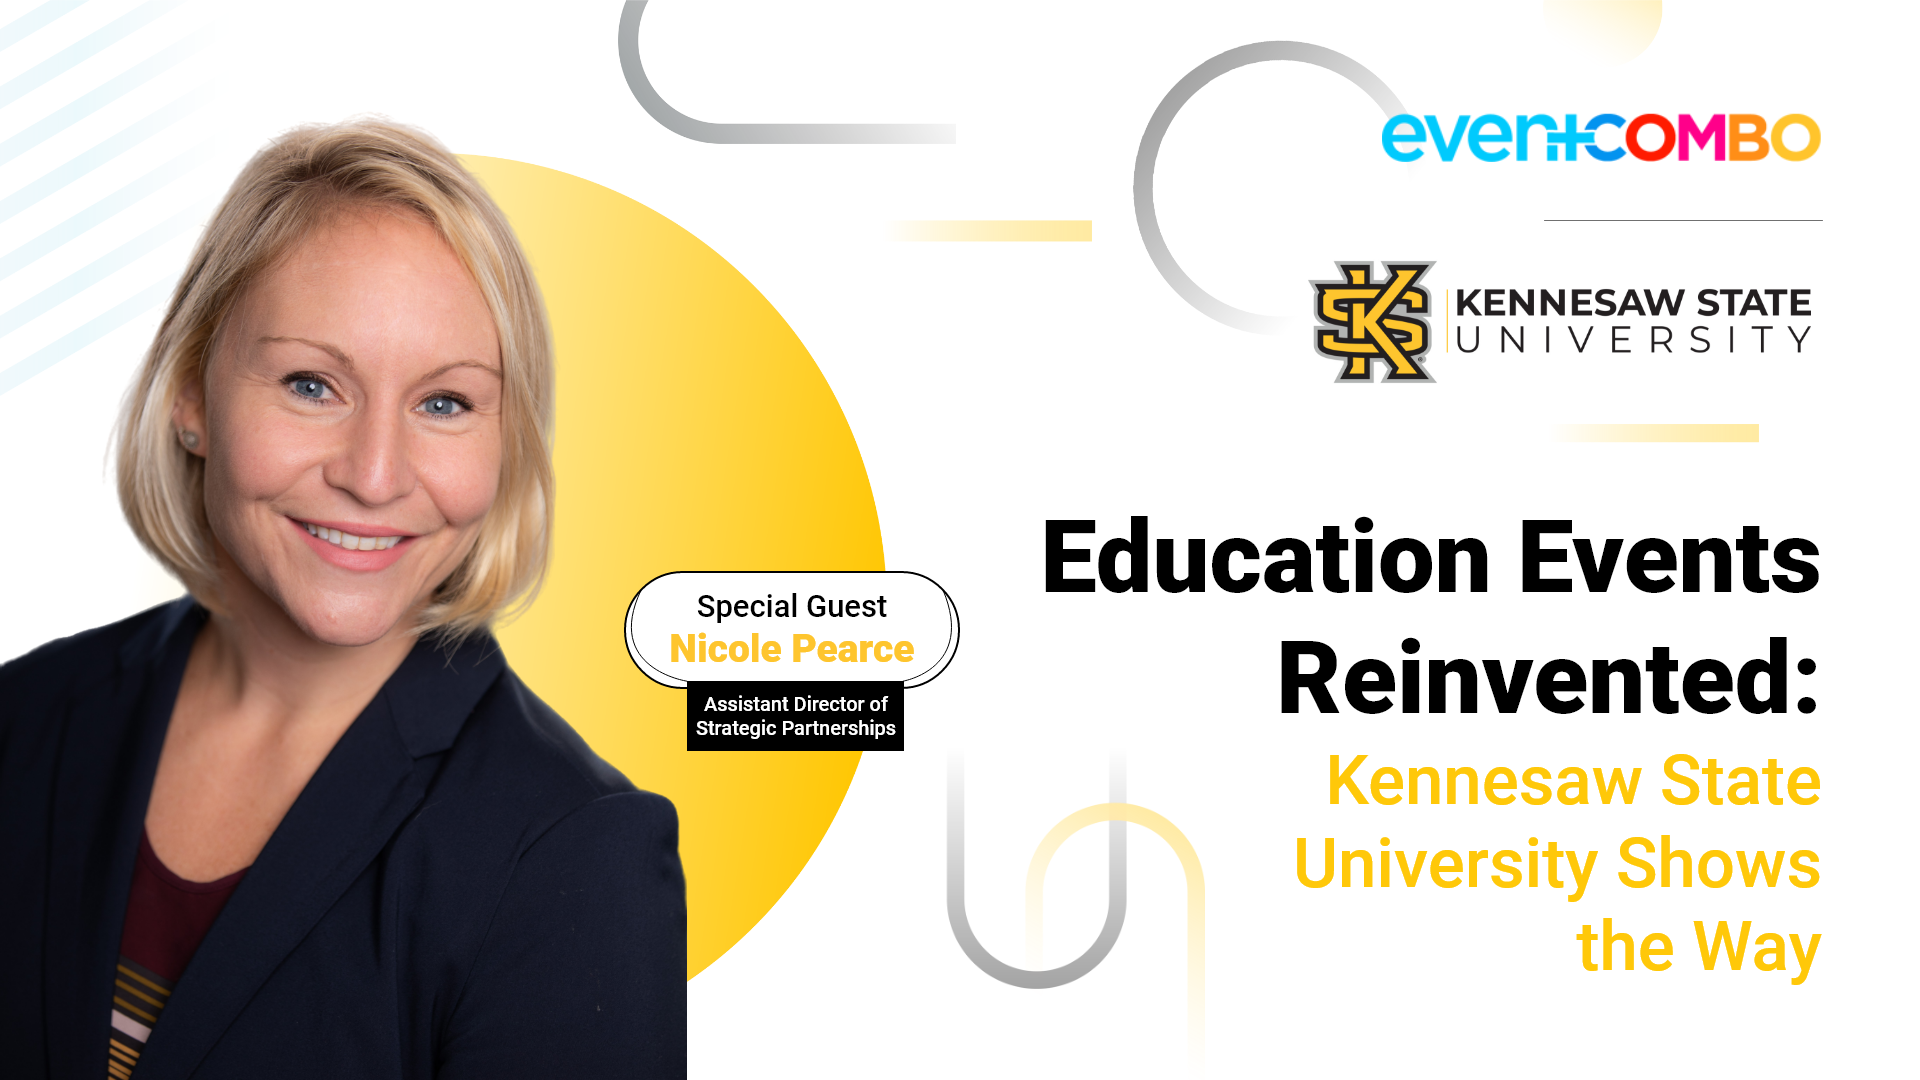 Education Events Reinvented: Kennesaw State University Shows the Way